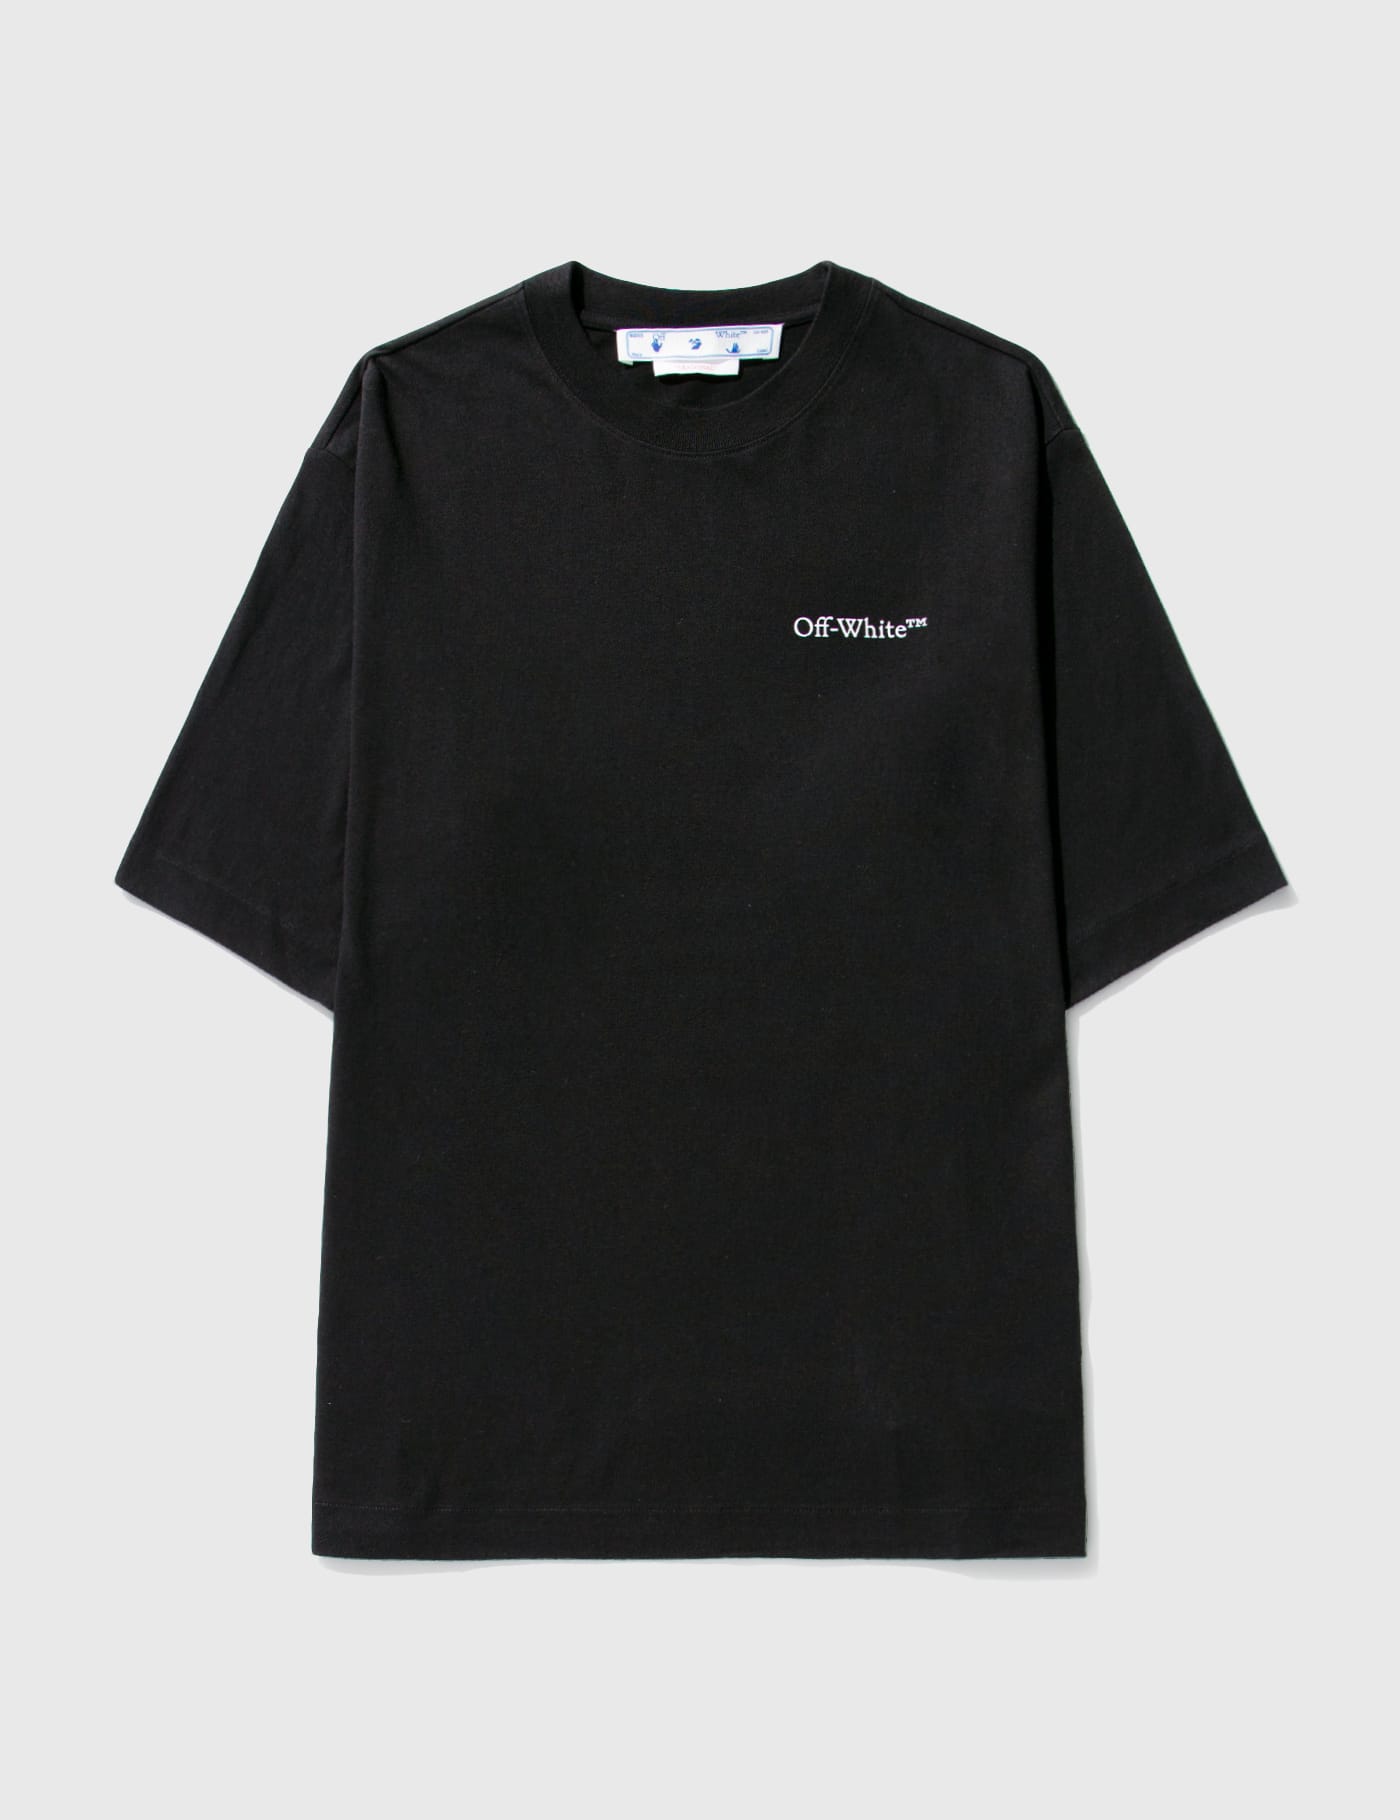 Off-White - Caravaggio Skate T-shirt | HBX - Globally Curated Fashion and  Lifestyle by Hypebeast